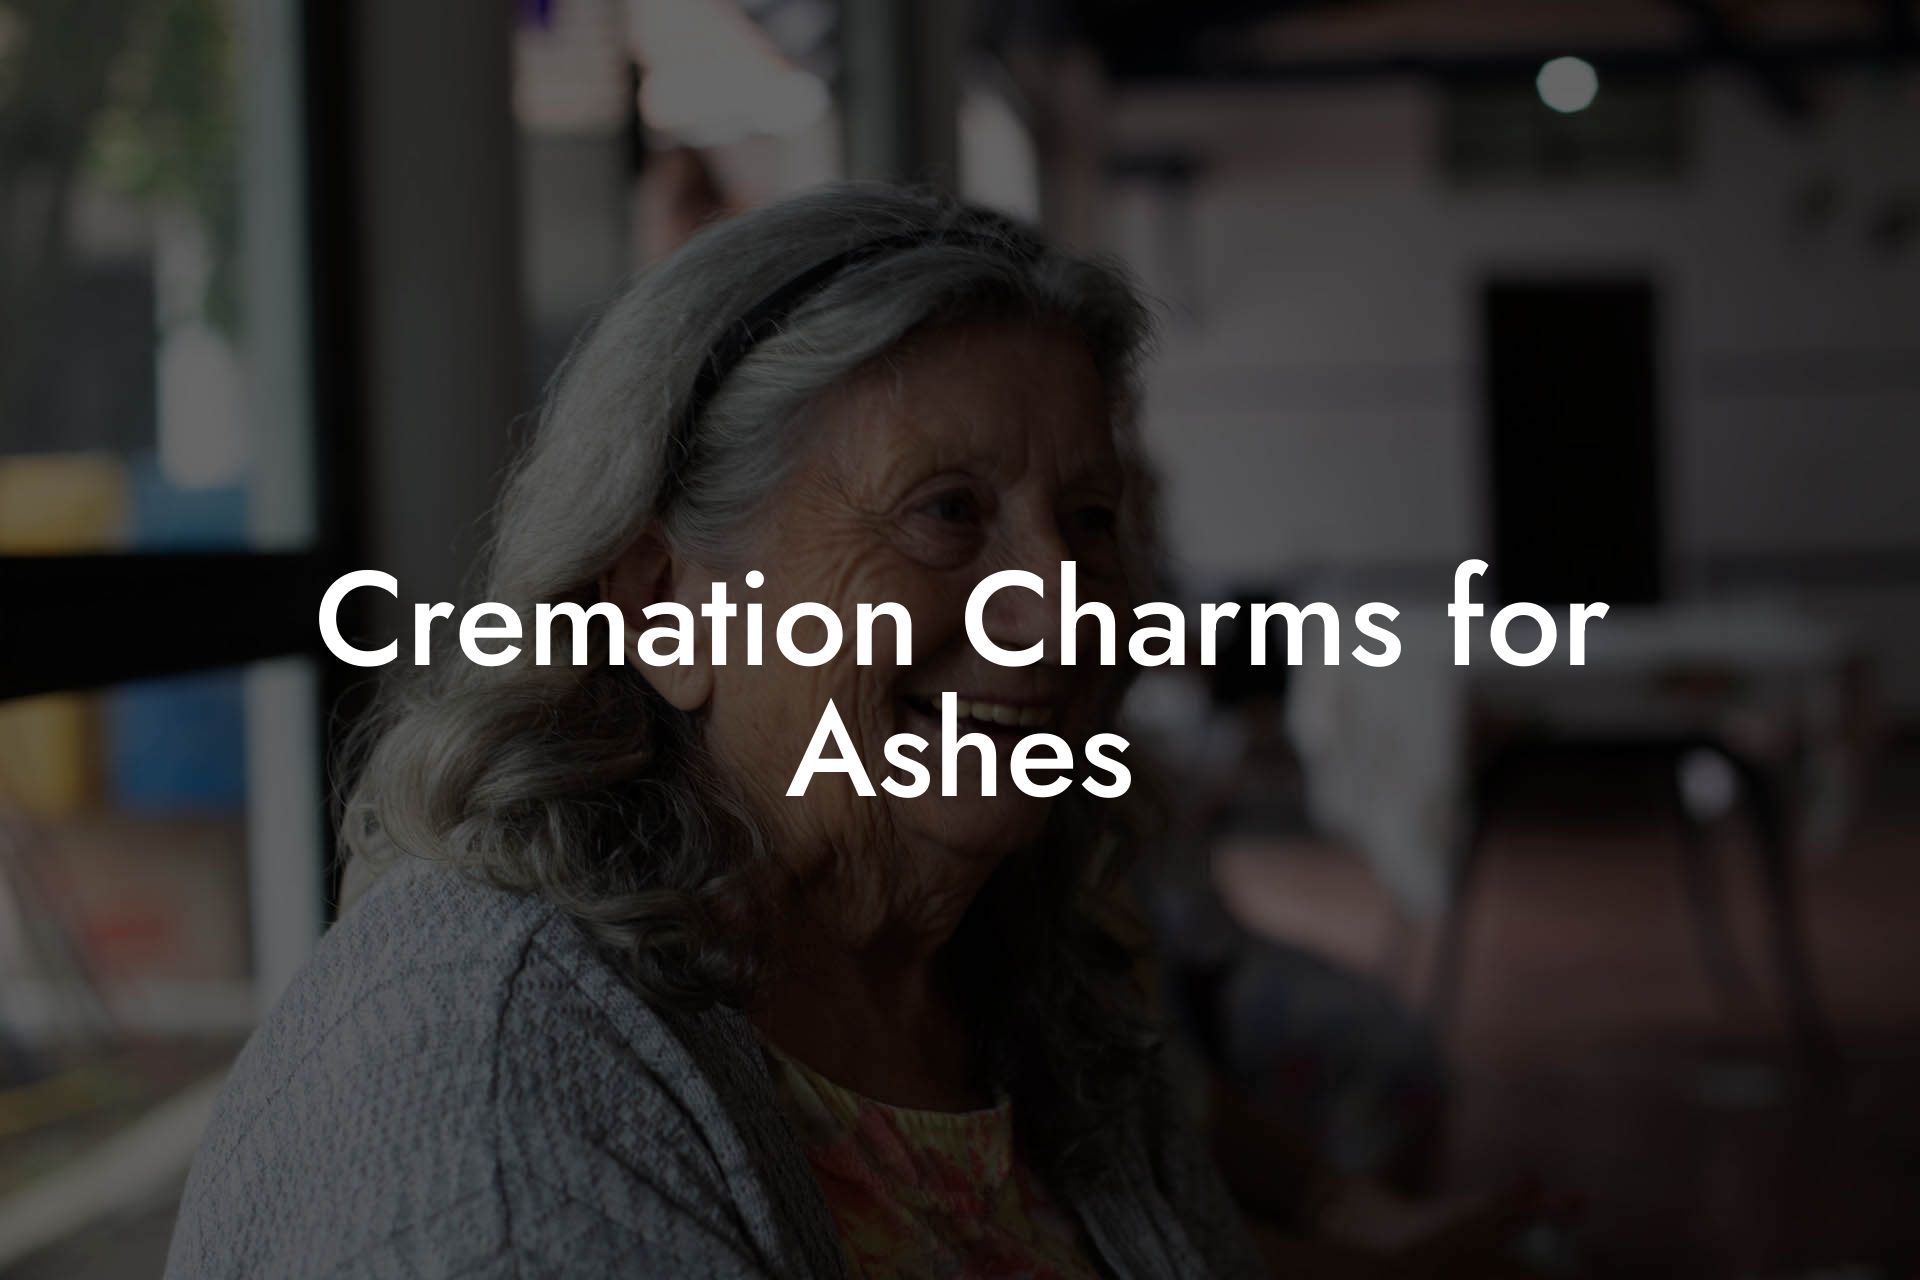 Cremation Charms for Ashes